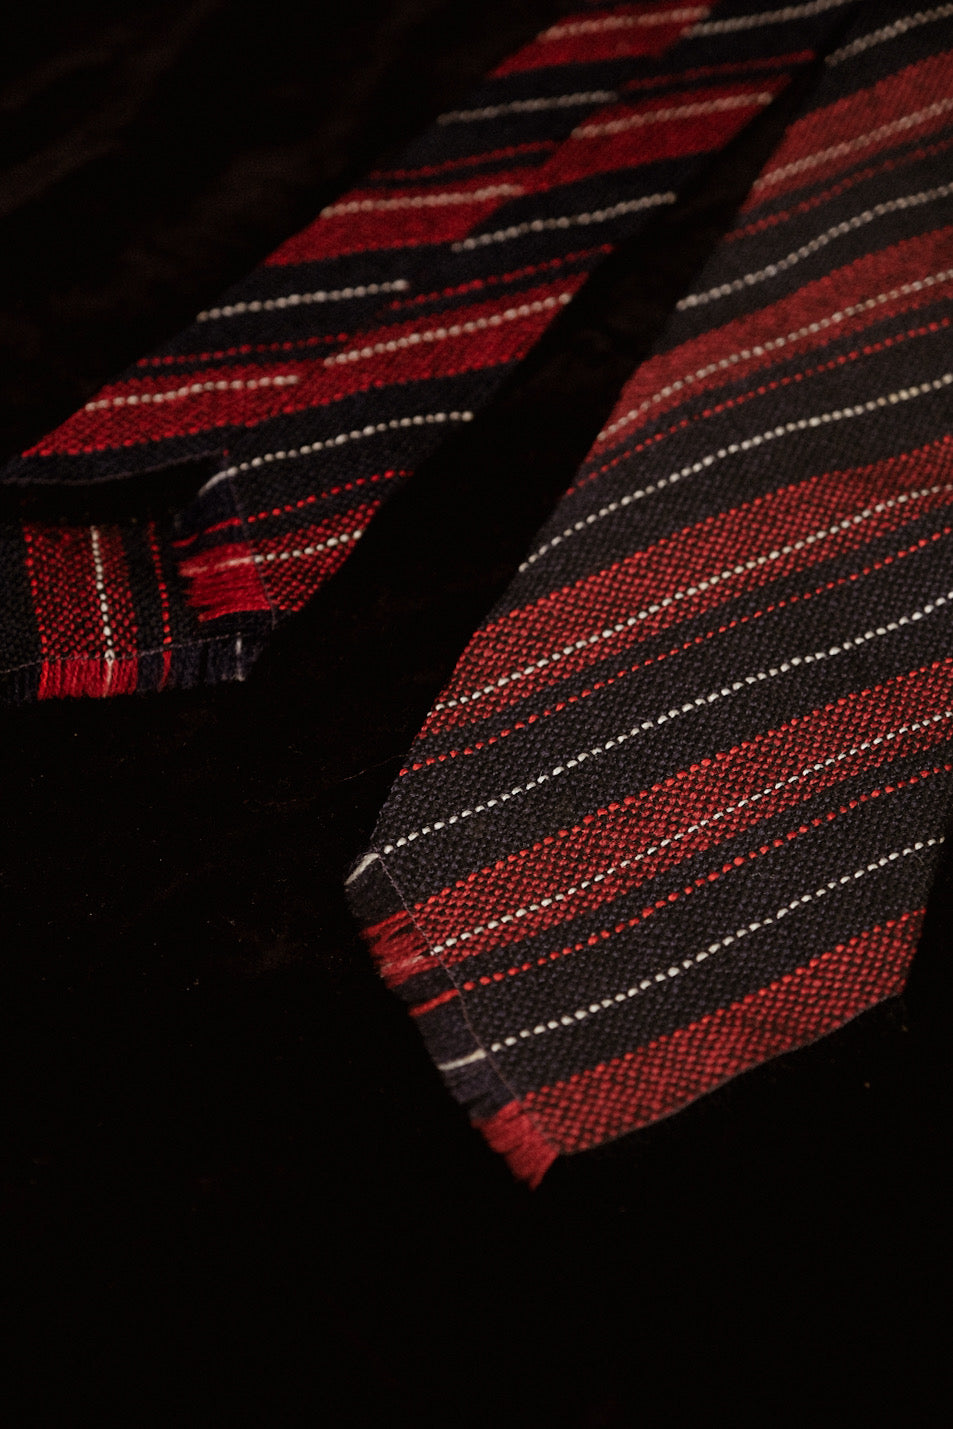 Red & Navy Striped Native American Tie By Webb Young